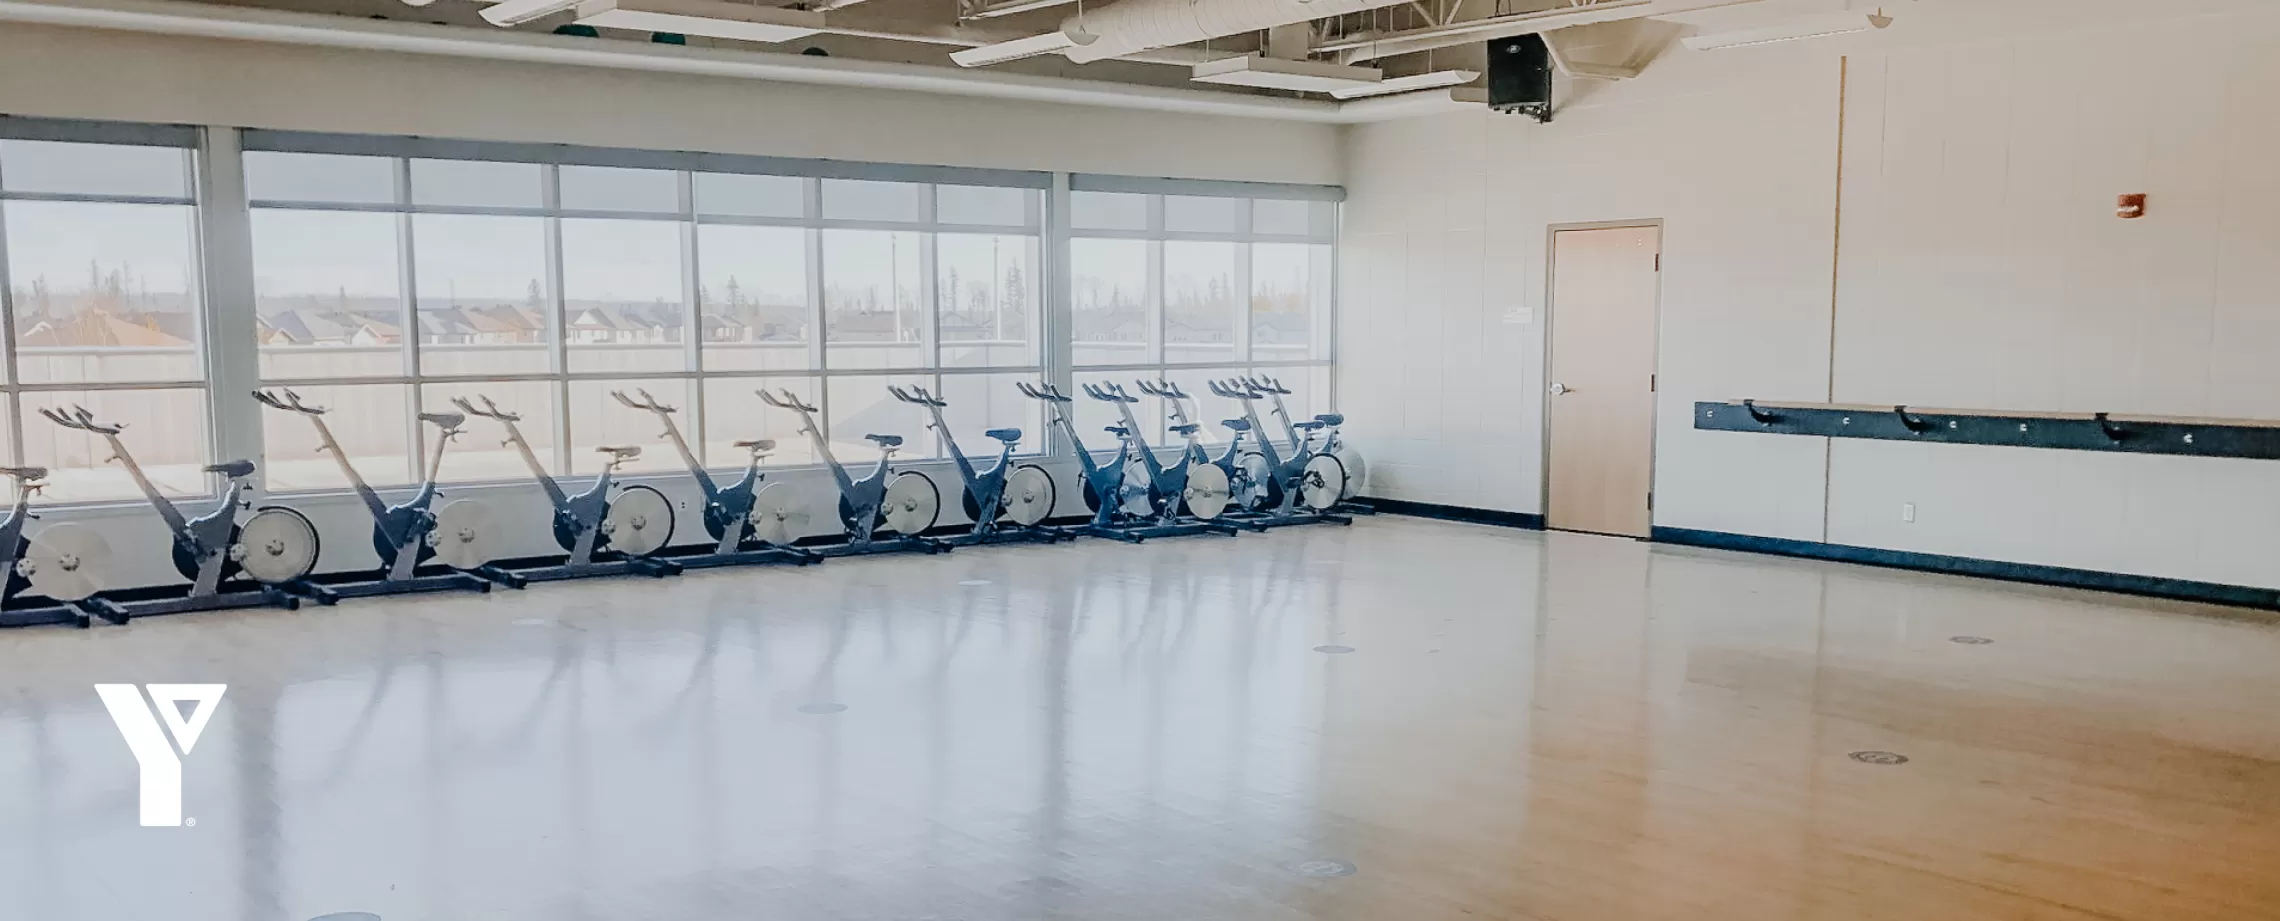 A sun-filled, wood-floored studio space with stationary bikes neatly organized against a wall of windows.